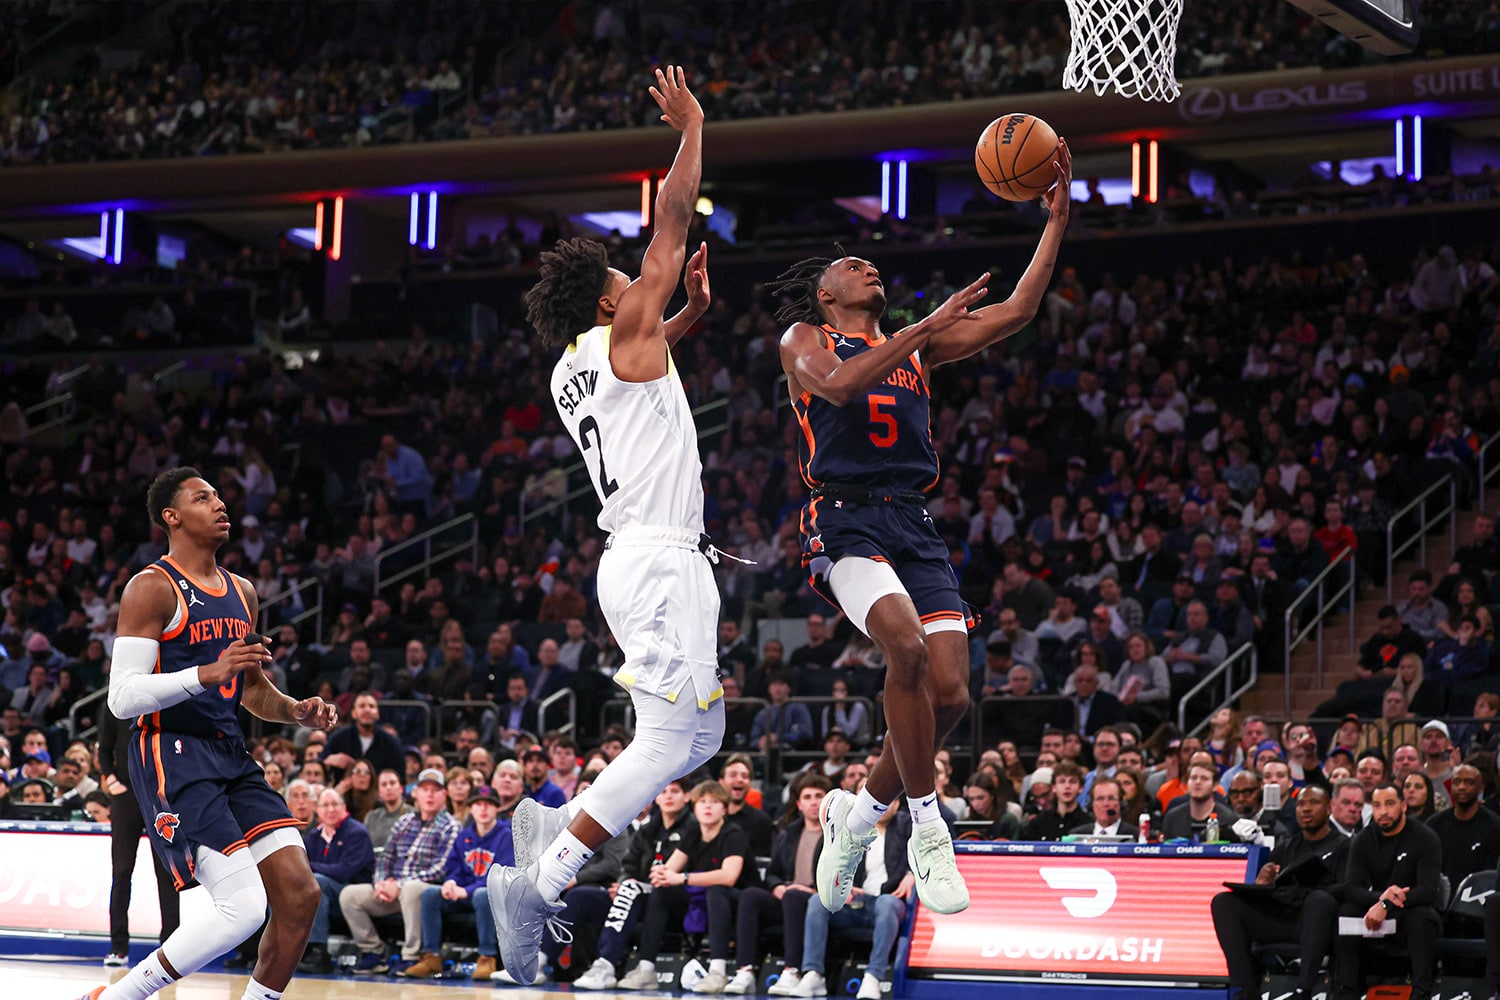 Immanuel Quickley of the New York Knicks goes for a layup during an NBA game.